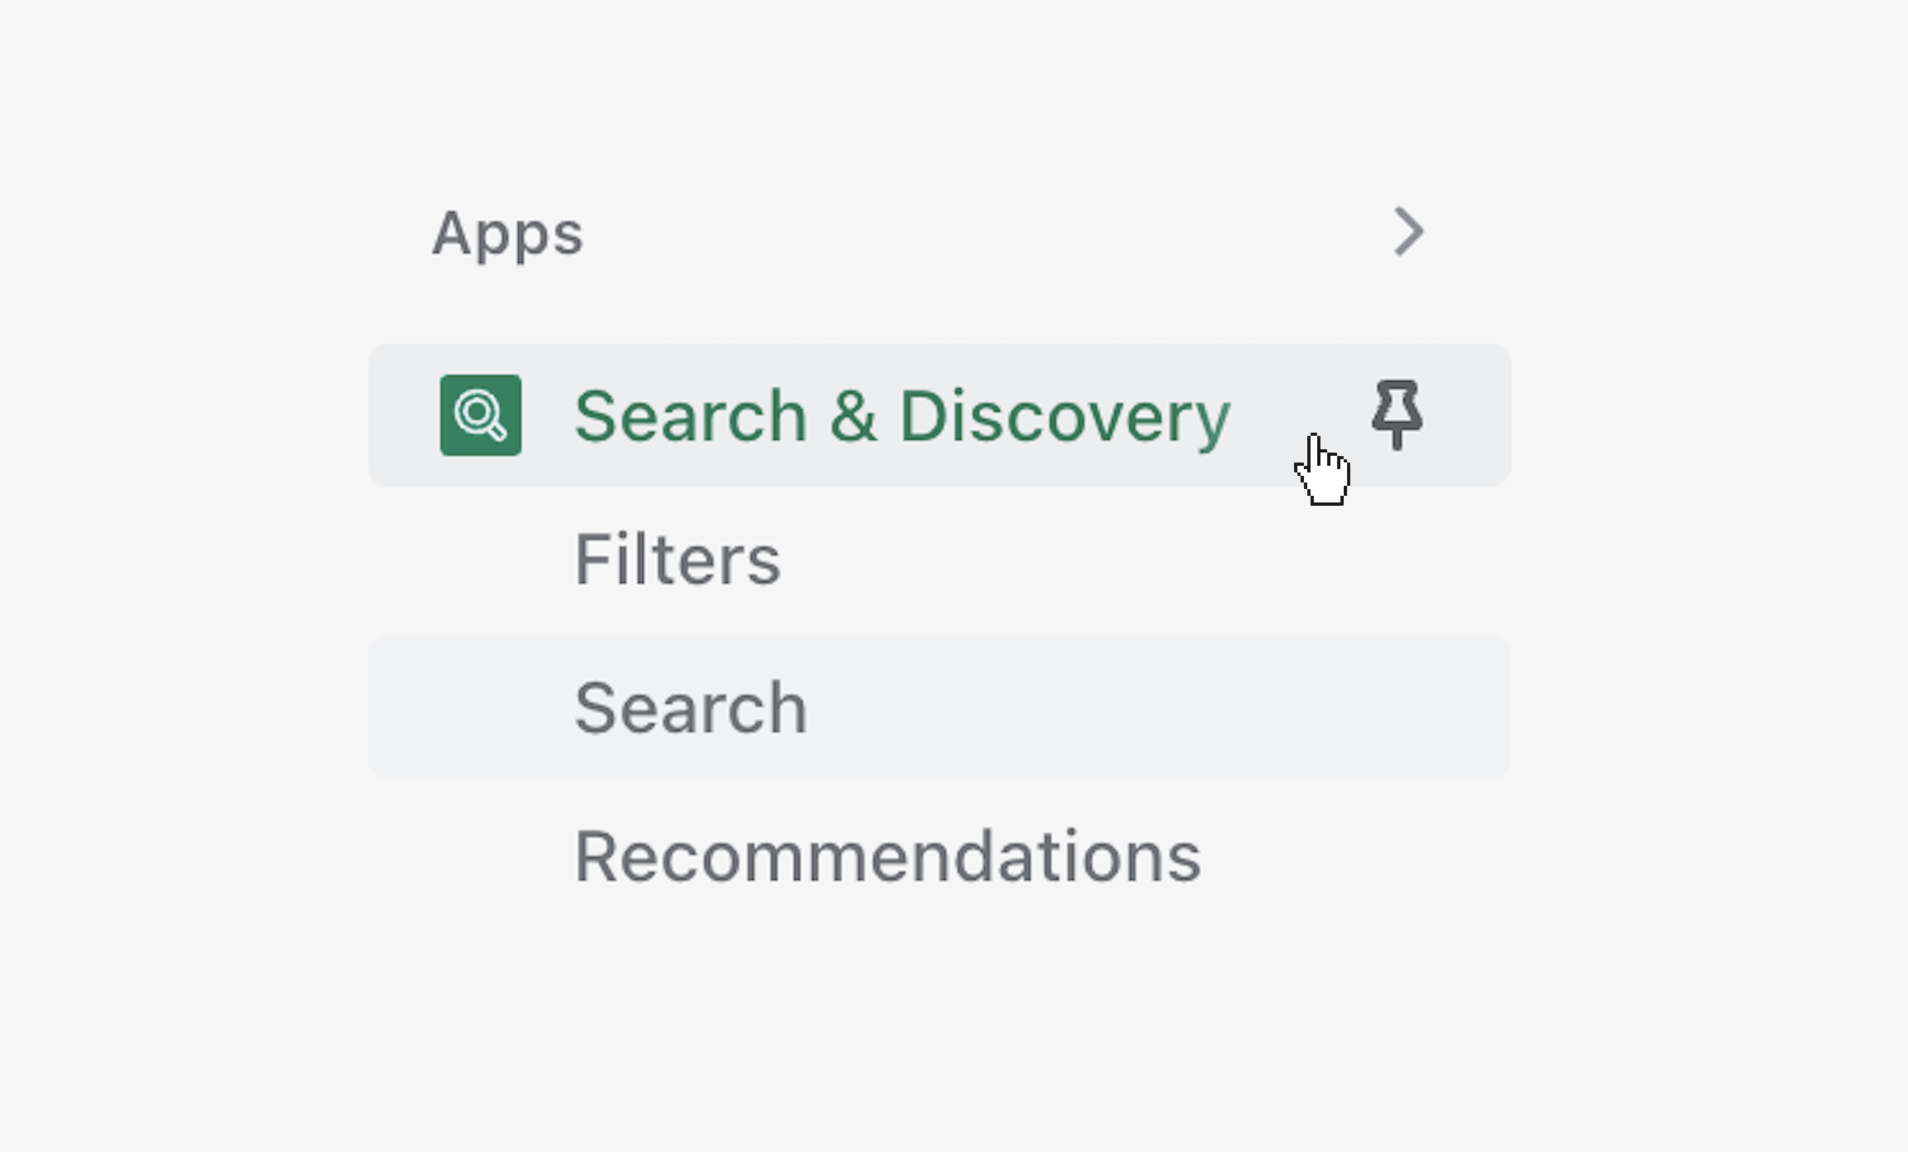 open_the_search_and_discovery_app_to_edit_filters_and_search.png